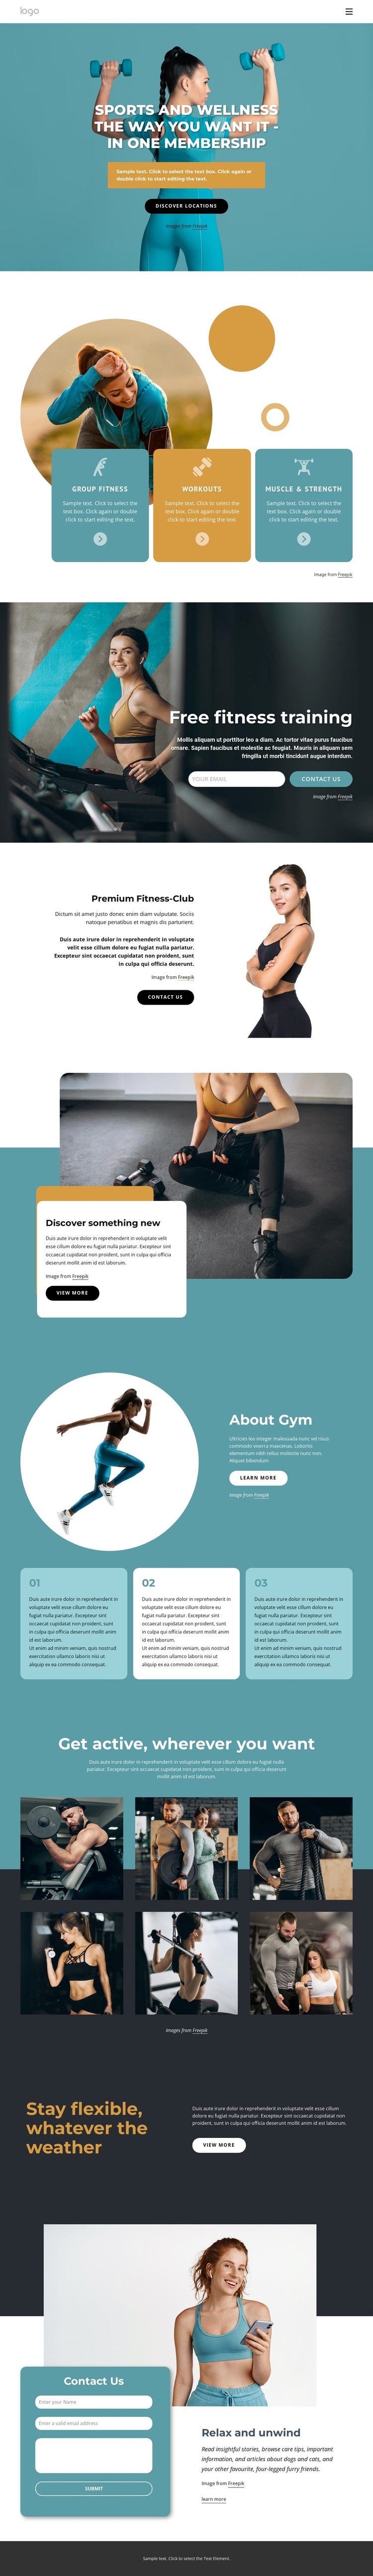 Workout anywhere with one membership Html Code Example